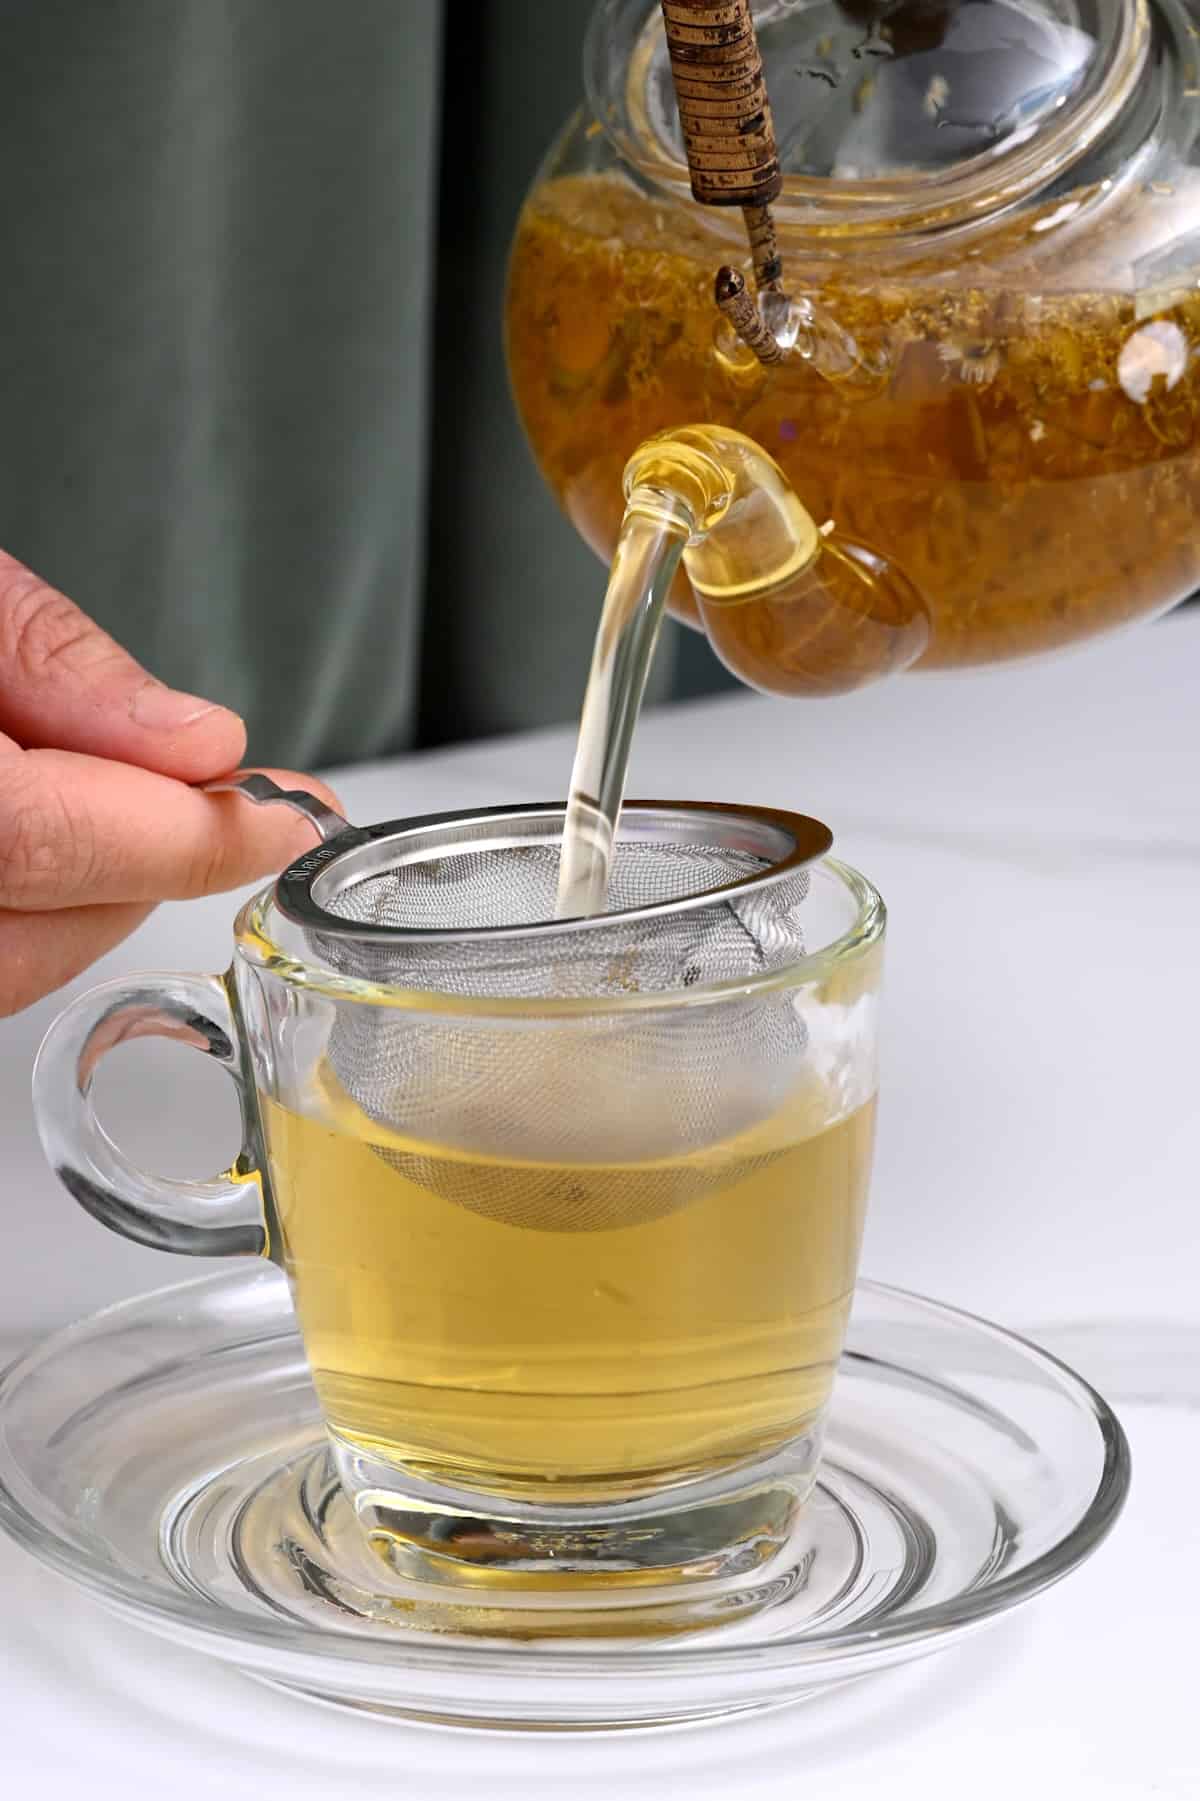 Pouring chamomile tea in a cup